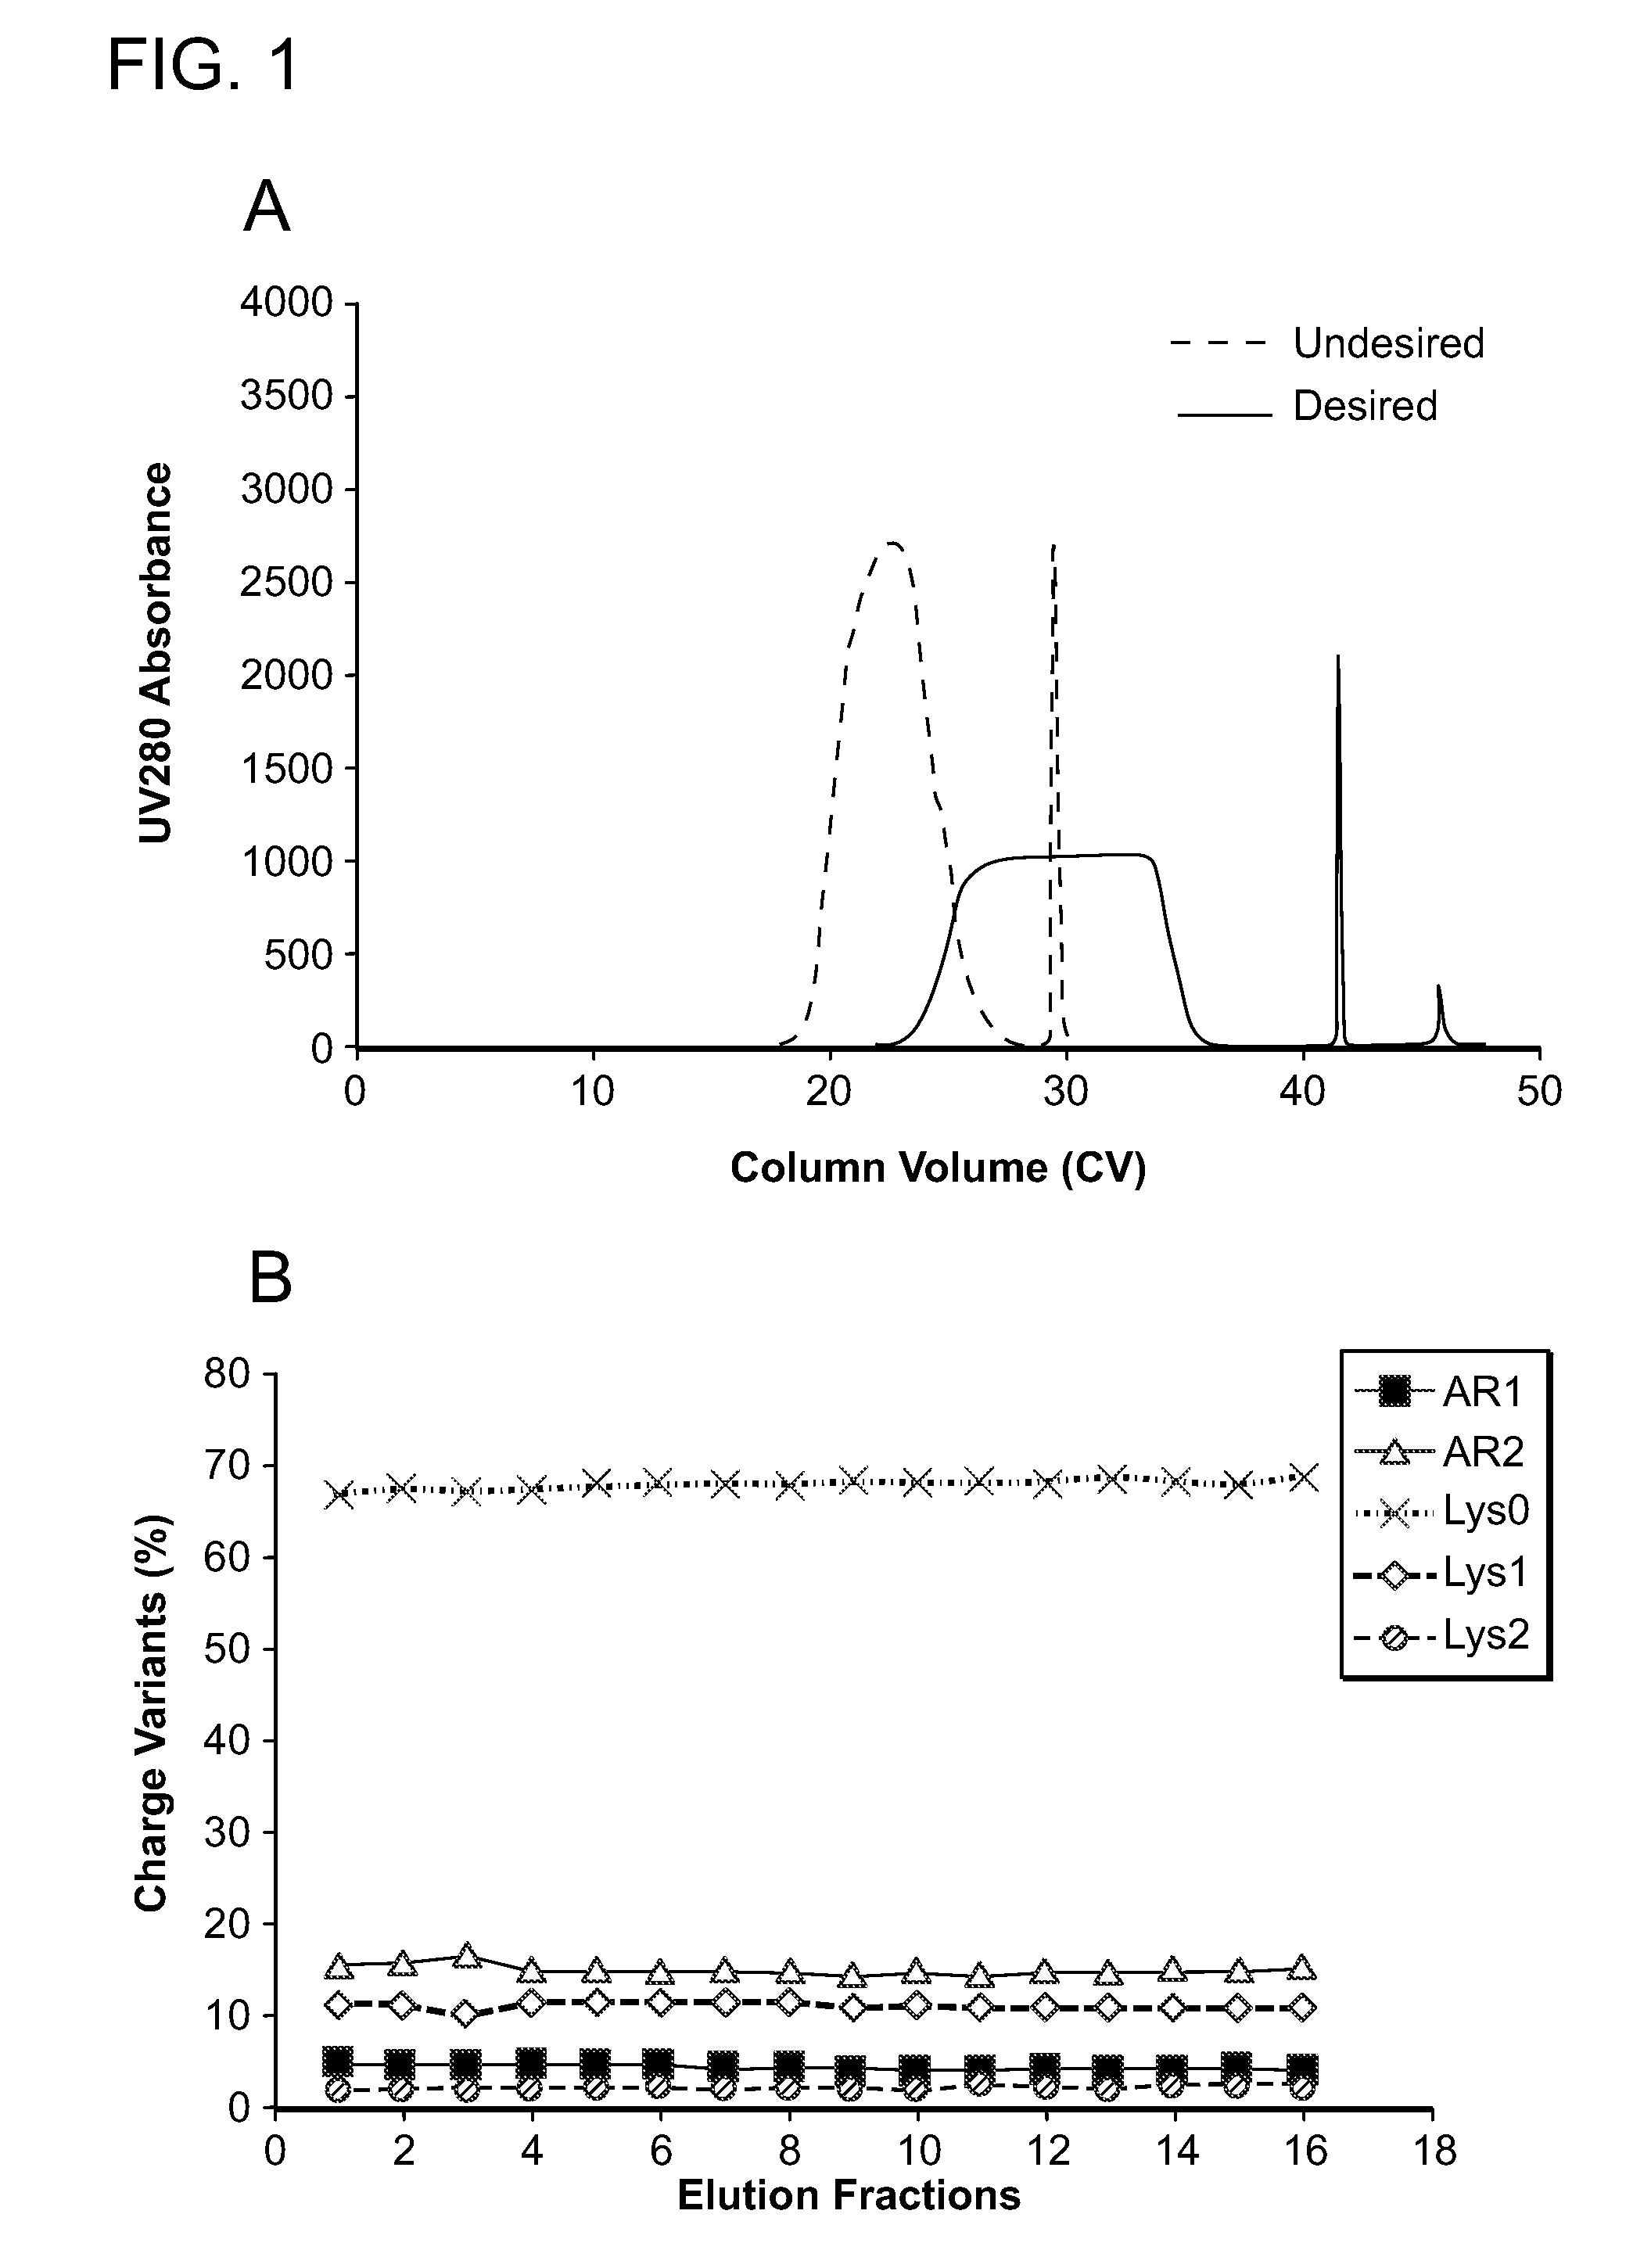 Low acidic species compositions and methods for producing and using the same using displacement chromatography